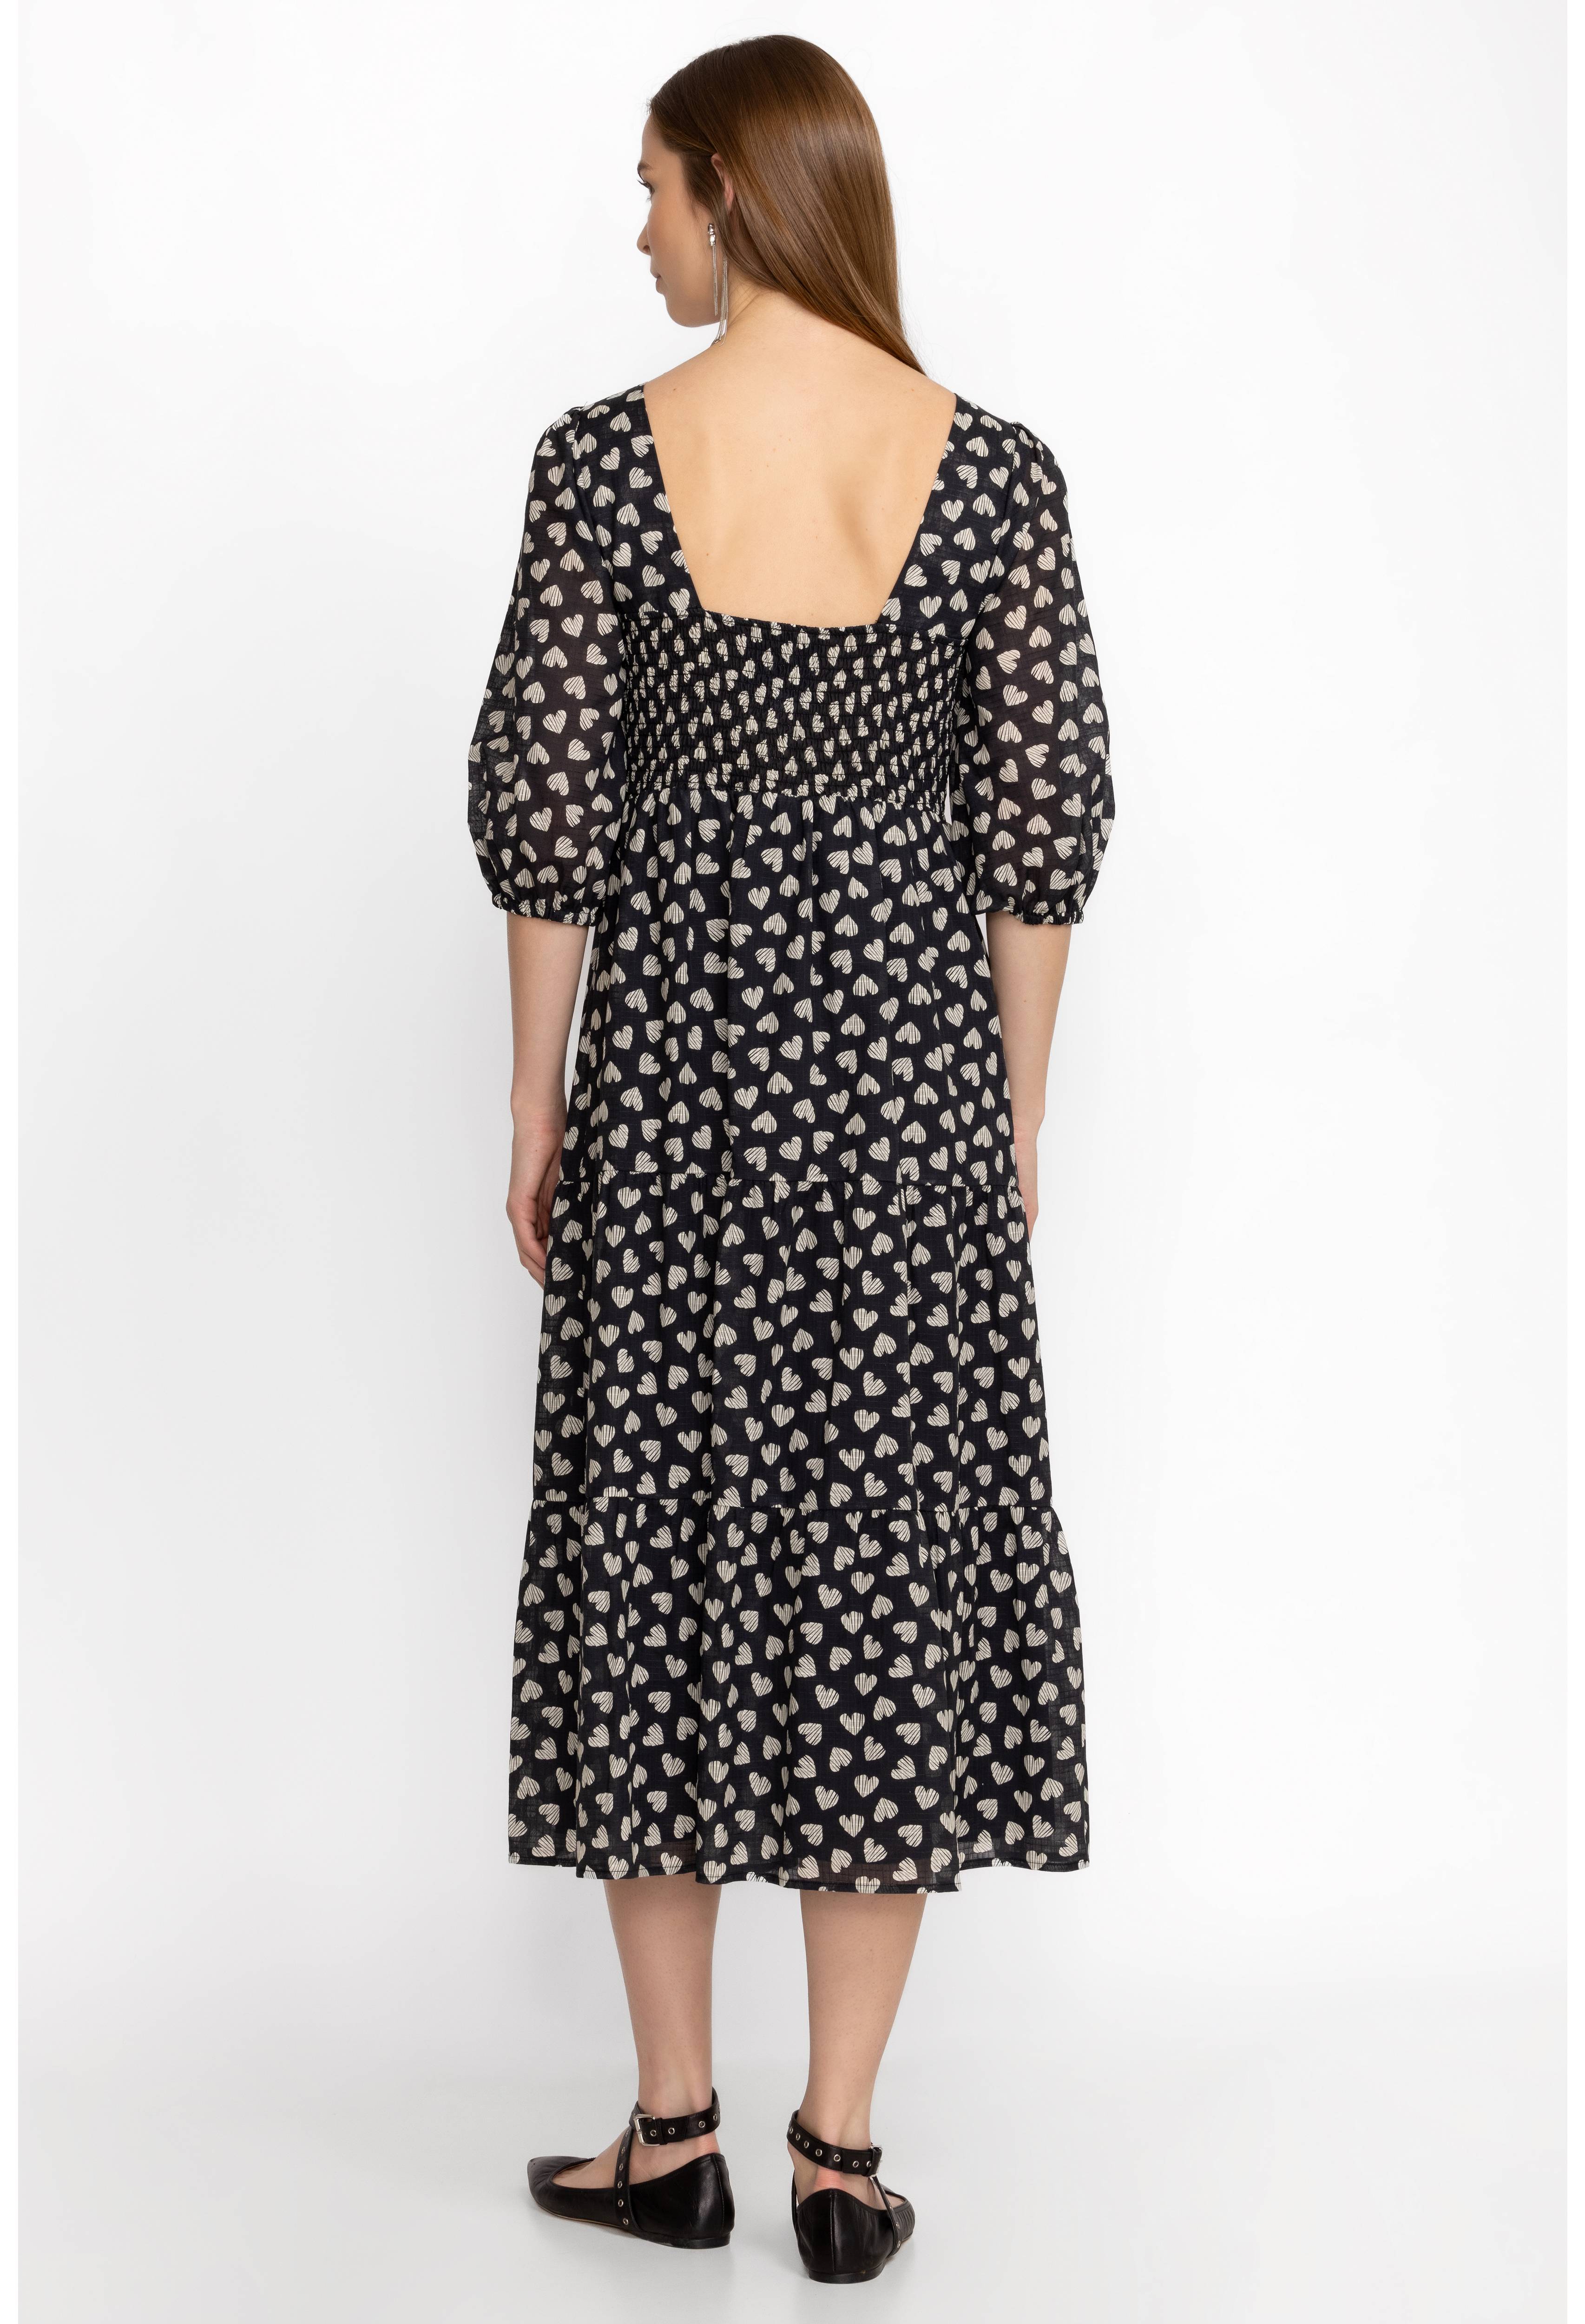 COUPLE OF HEARTS COTTON MIDI DRESS, , large image number 5